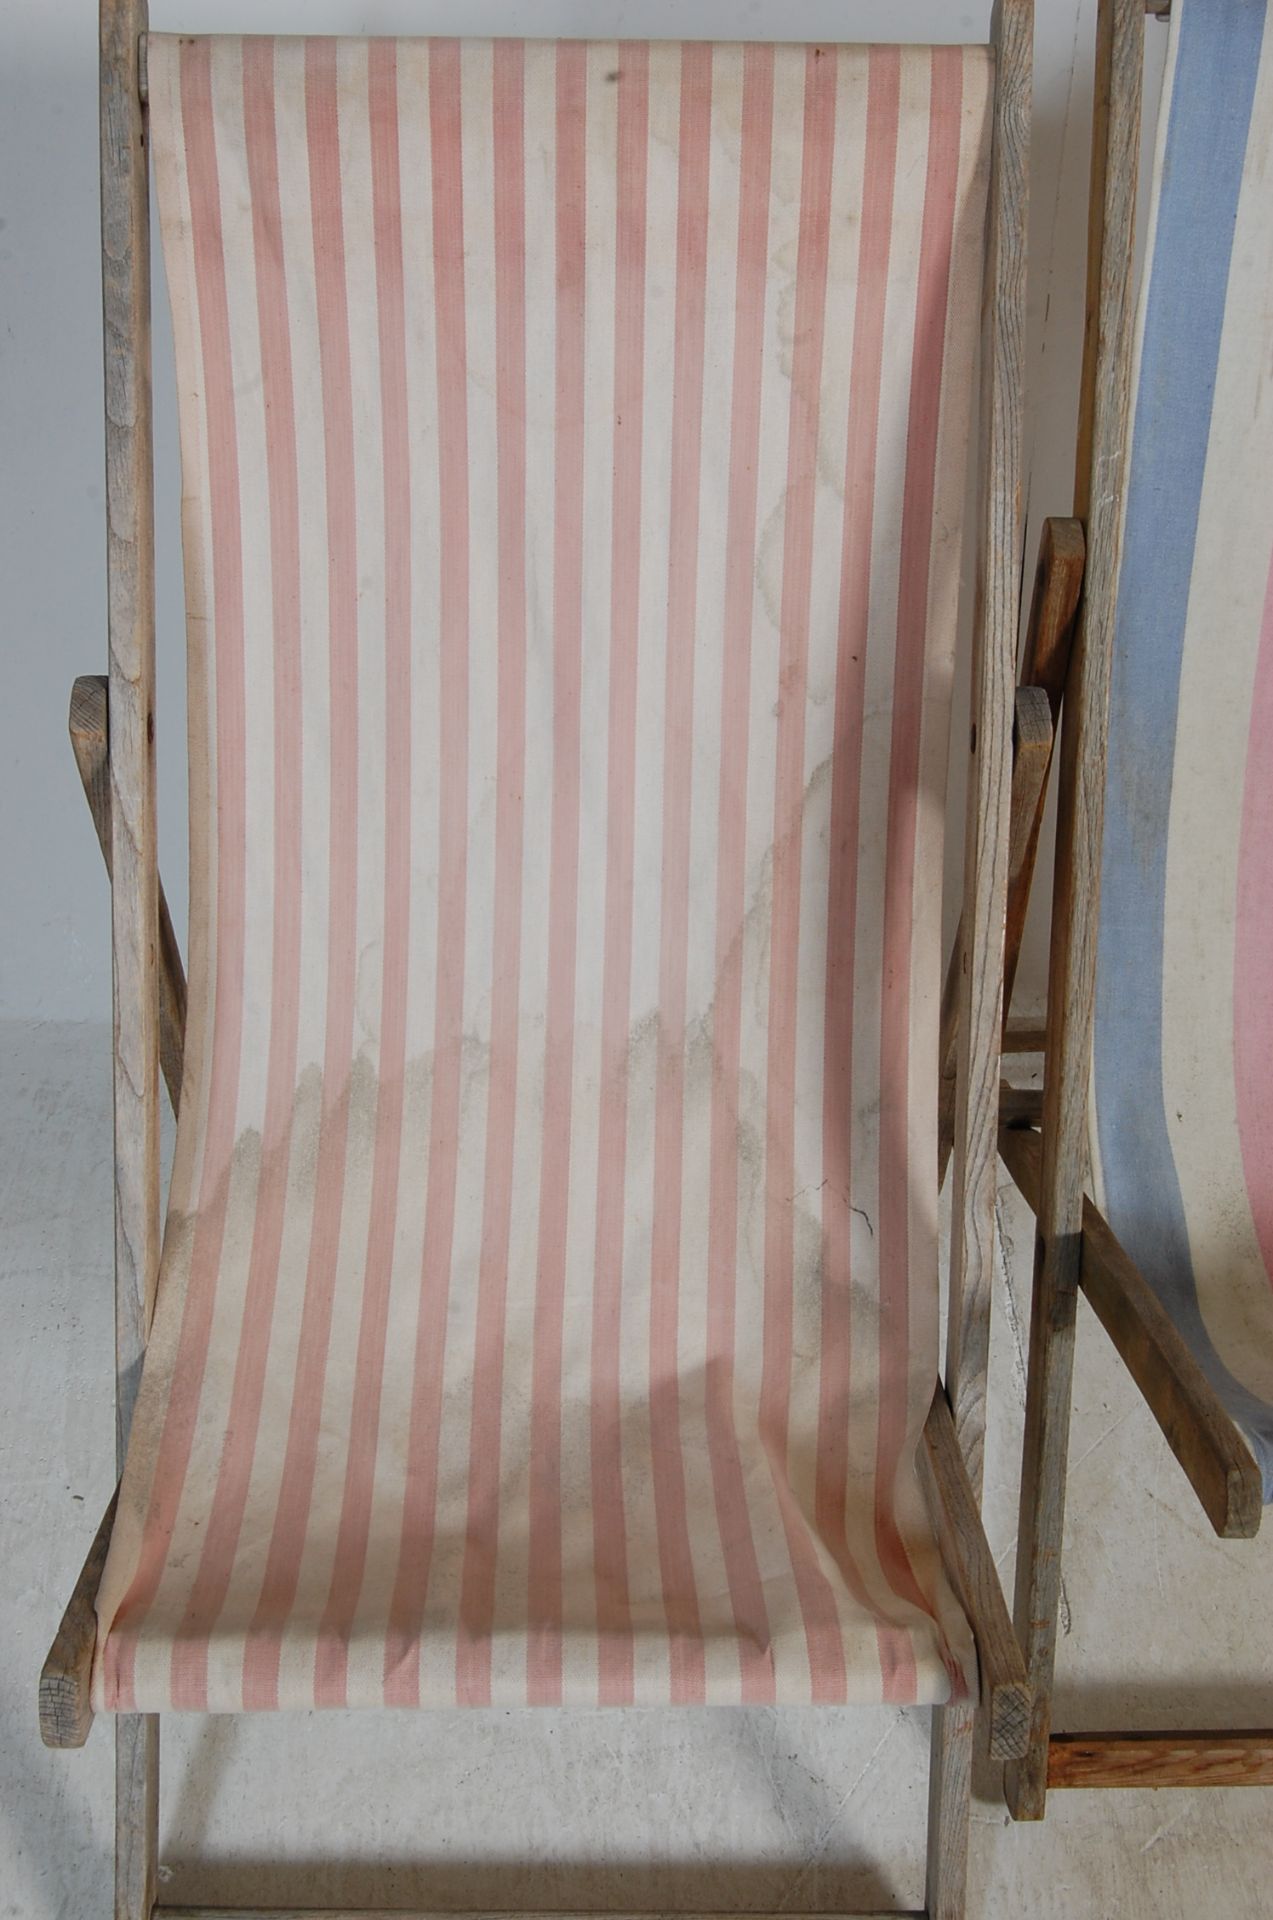 COLLECTION OF FOUR VINTAGE FOLDING DECK CHAIRS - Image 7 of 9